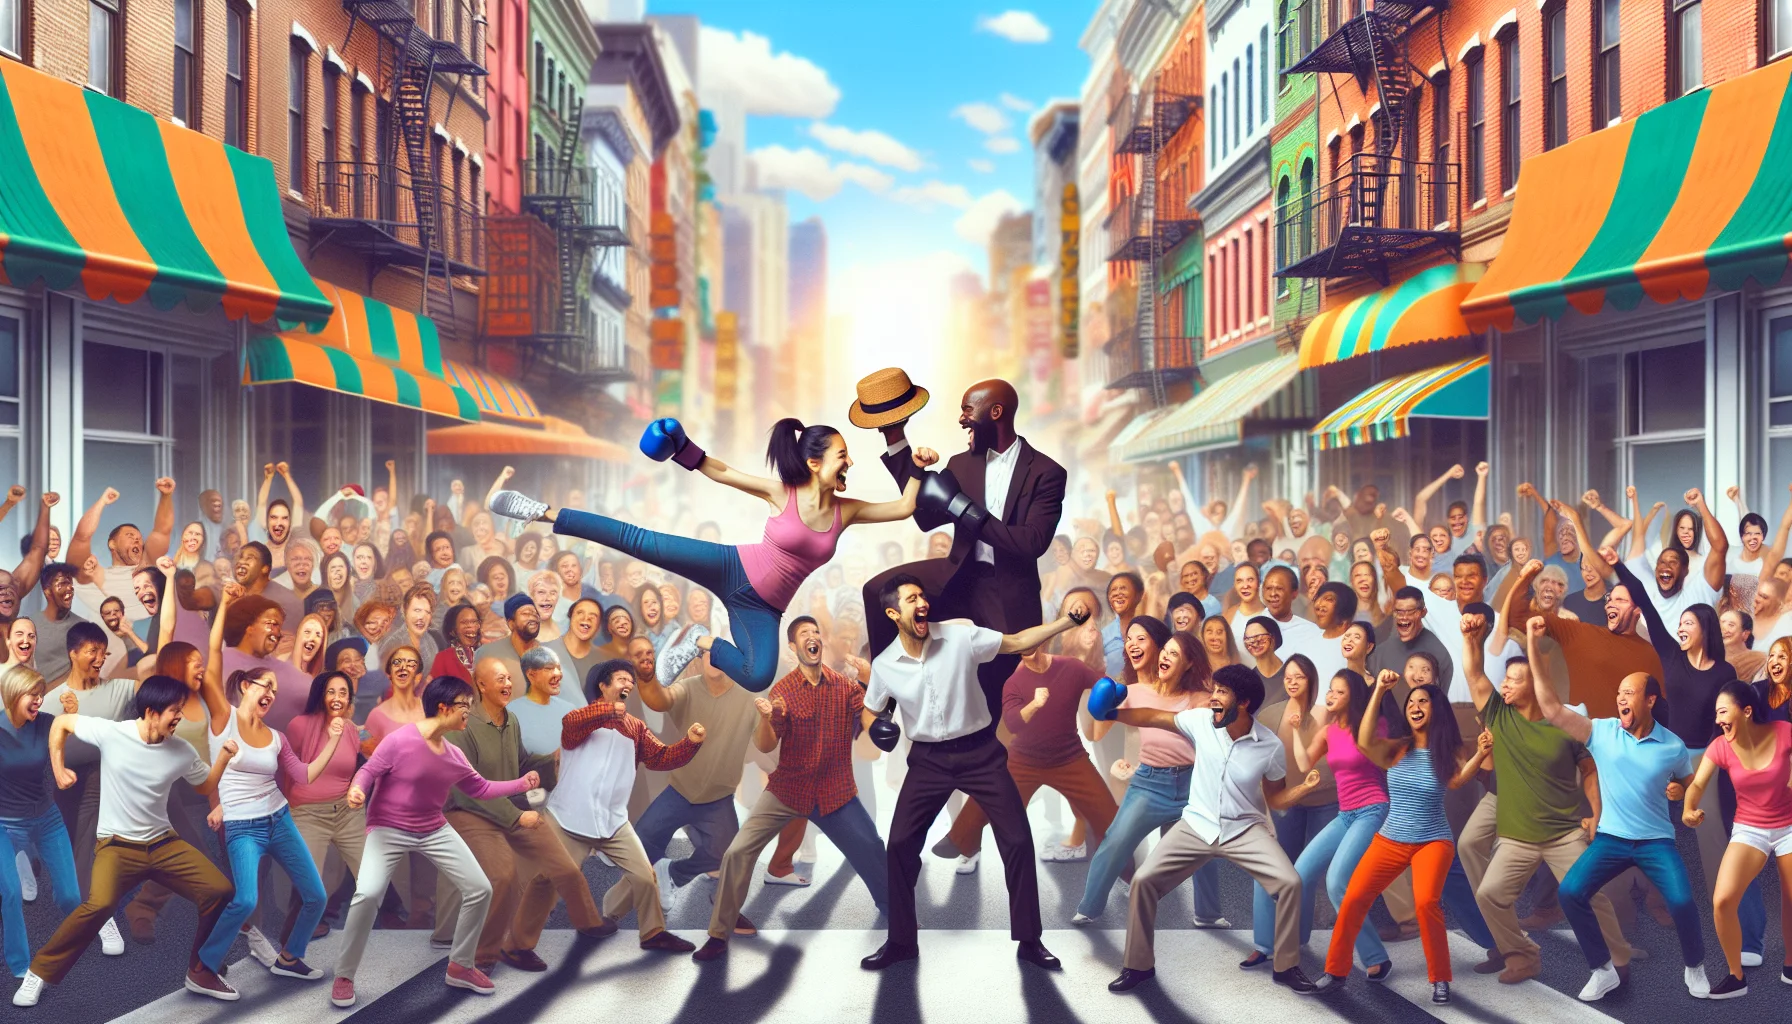 Create a whimsical image of a crowded, broad street filled with diverse individuals engaging in kickboxing exercise. Imagine an Asian woman and a Black man playfully sparring with each other while a group of enthusiastic onlookers cheer, each from different ethnic backgrounds like Hispanic, Middle Eastern and Caucasian. Insert a scene of a South Asian man doing high kicks which result in his hat flying off his head to captivate the essence of comedy, enticing people to exercise. Complete the scene with the street alive with vivid colors, and the sun shining brightly, promoting a healthy, active lifestyle.